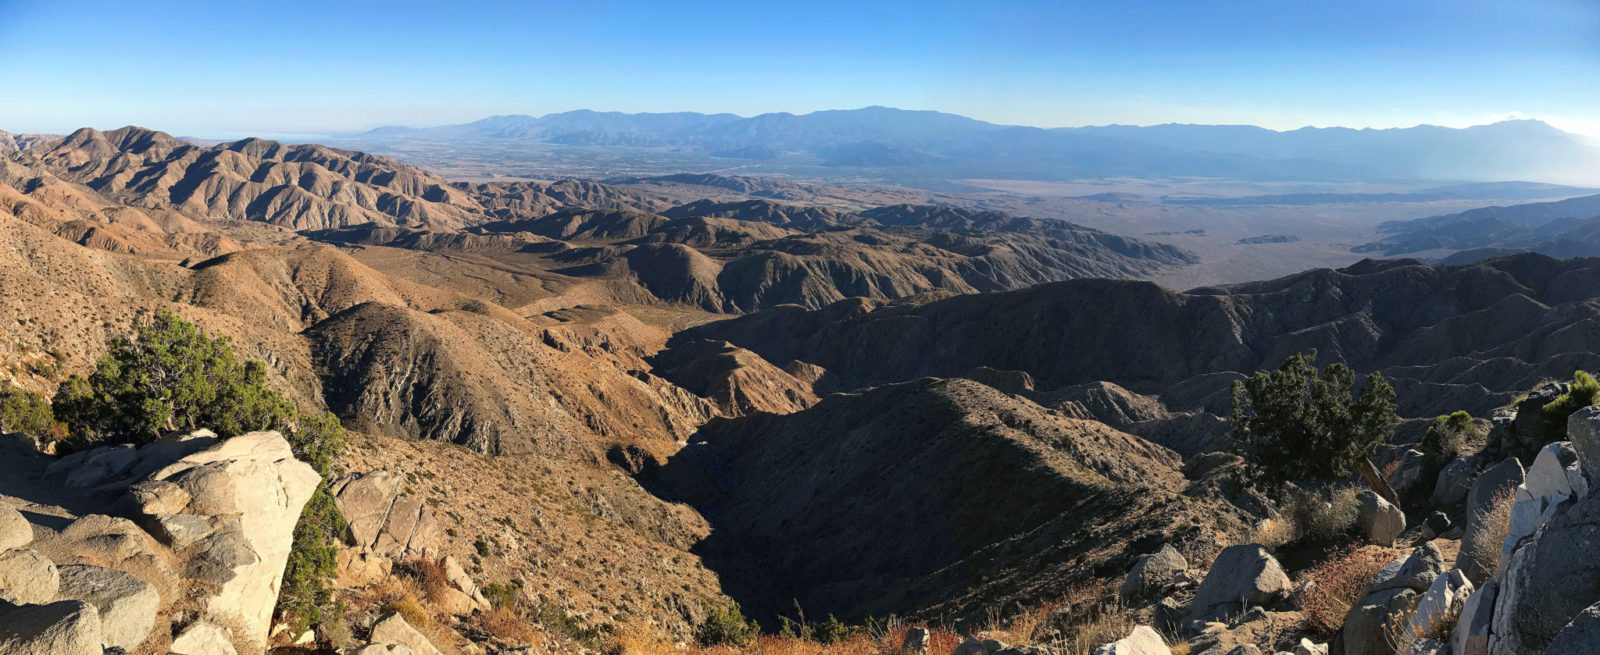 Panorama from Keys View in Joshua Tree National Park